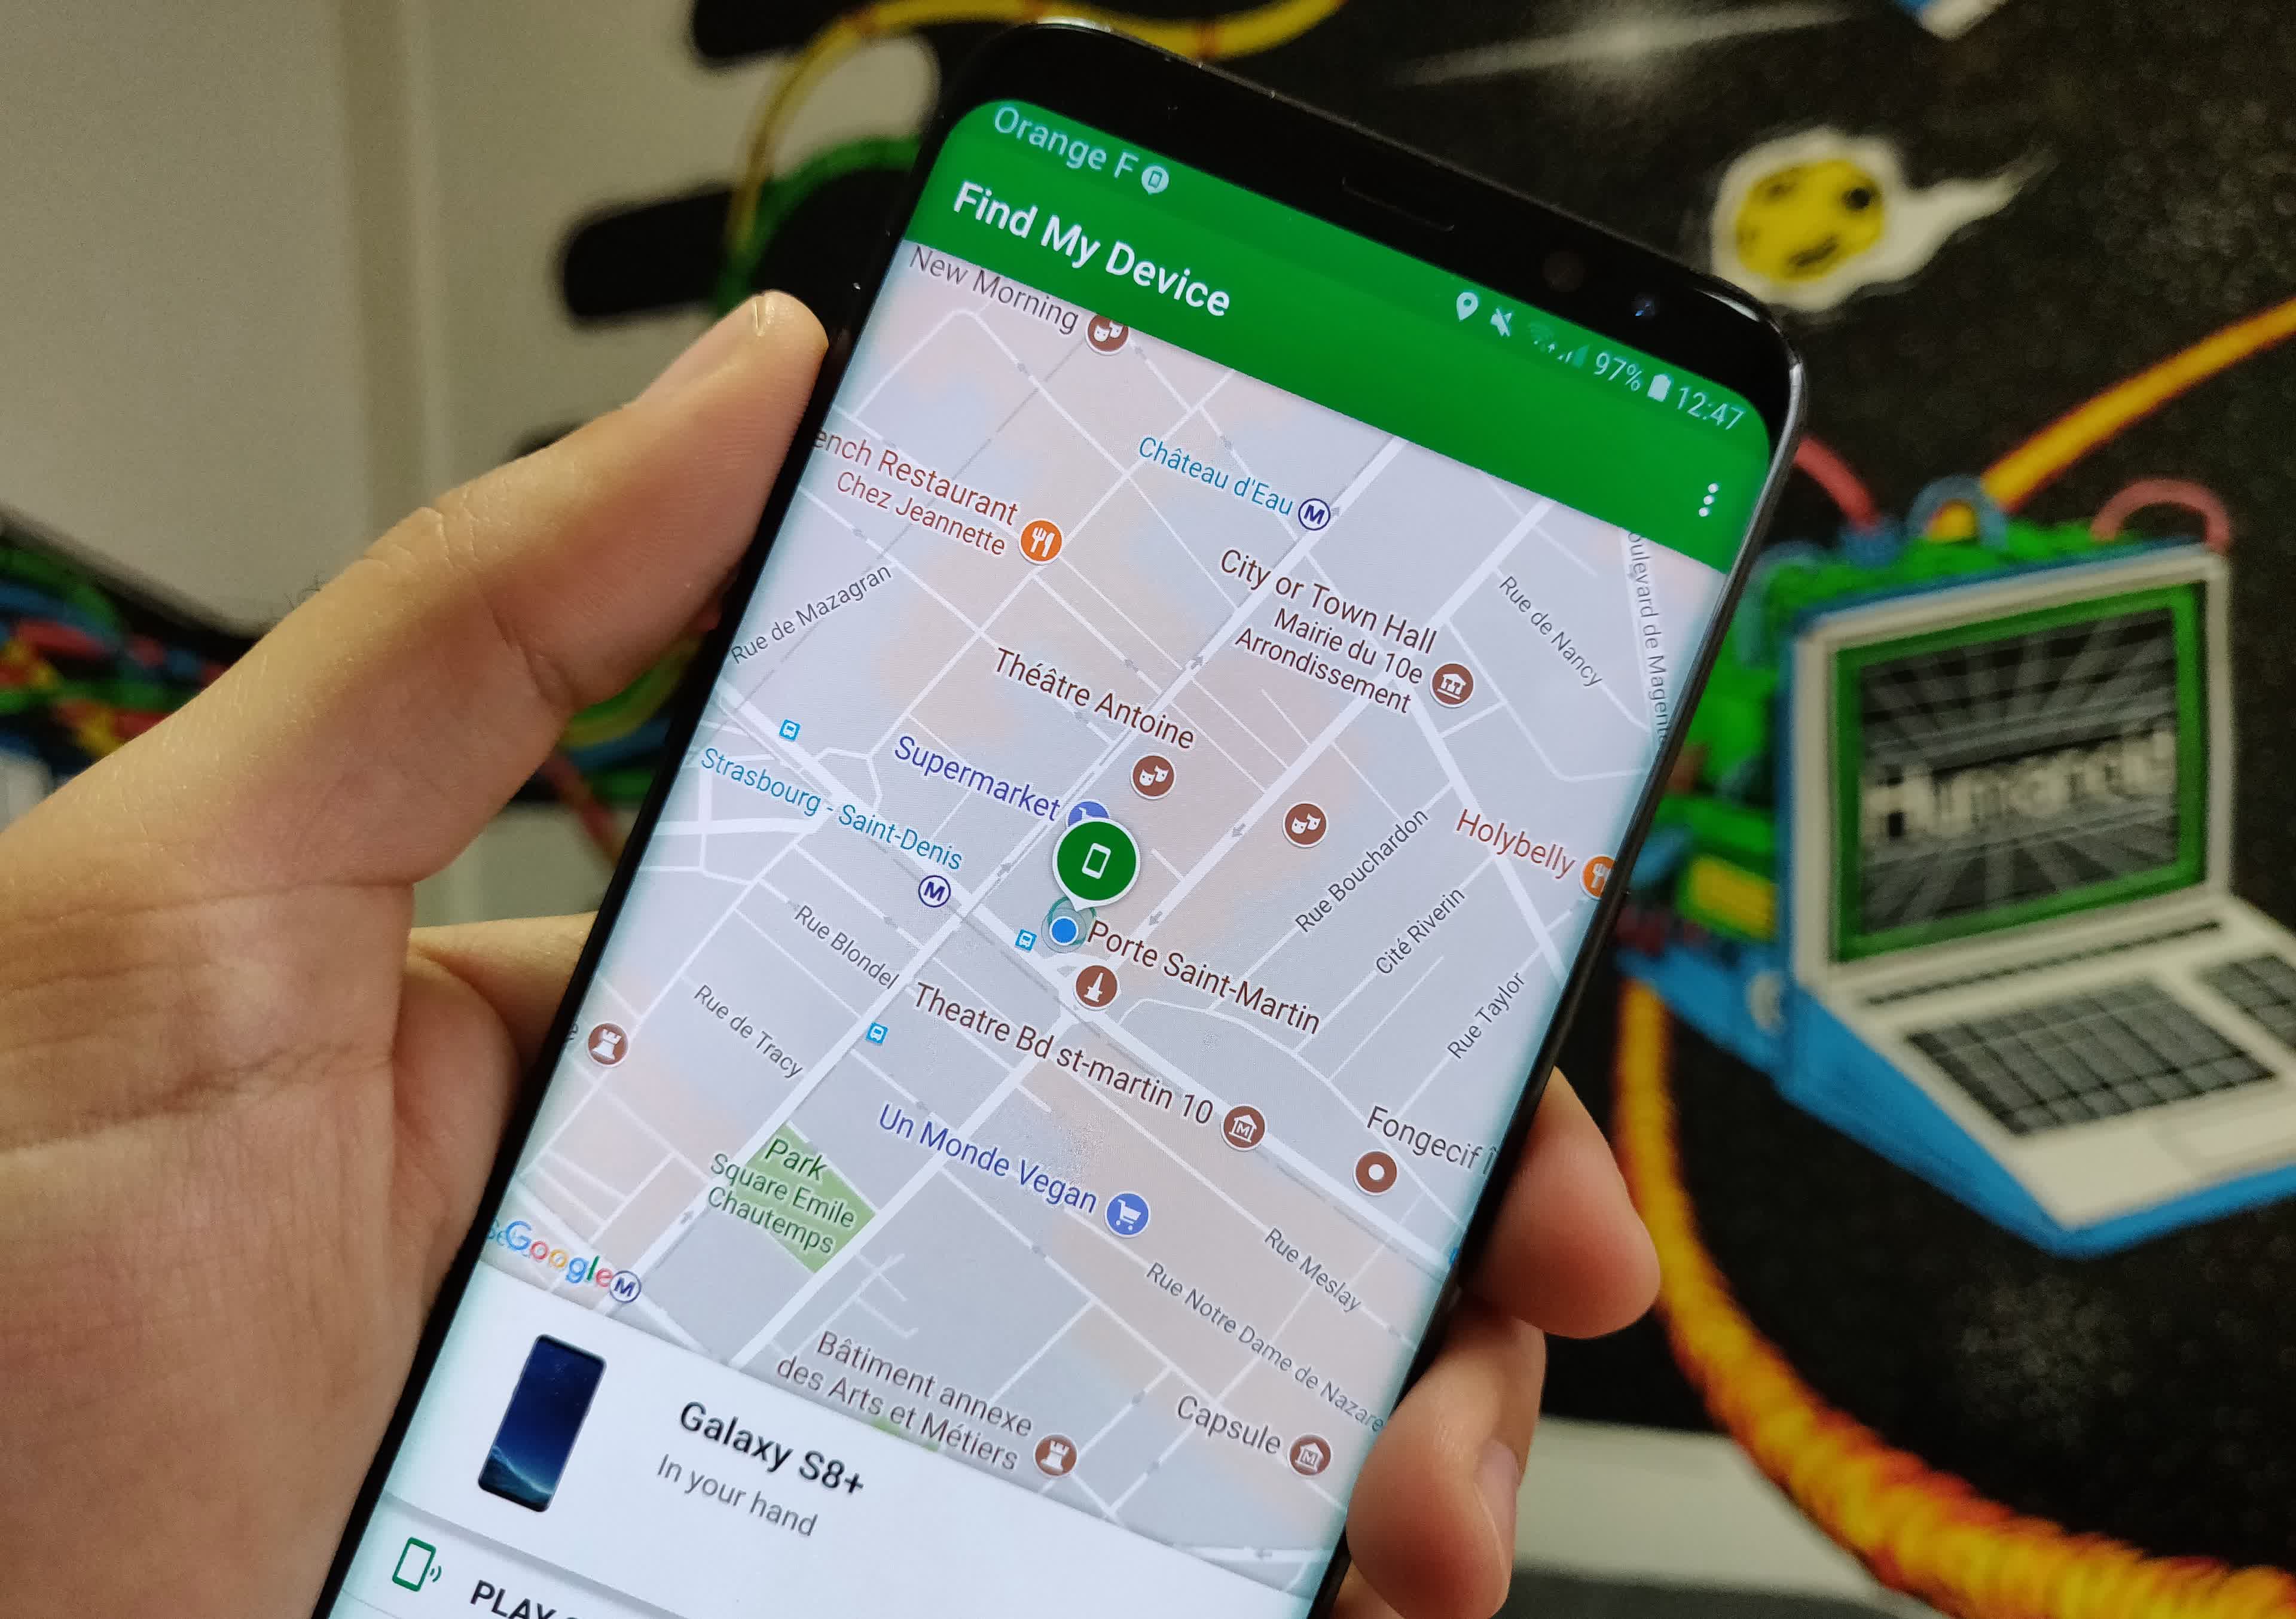 Google may be developing a service similar to Apple's Find My network for Android users